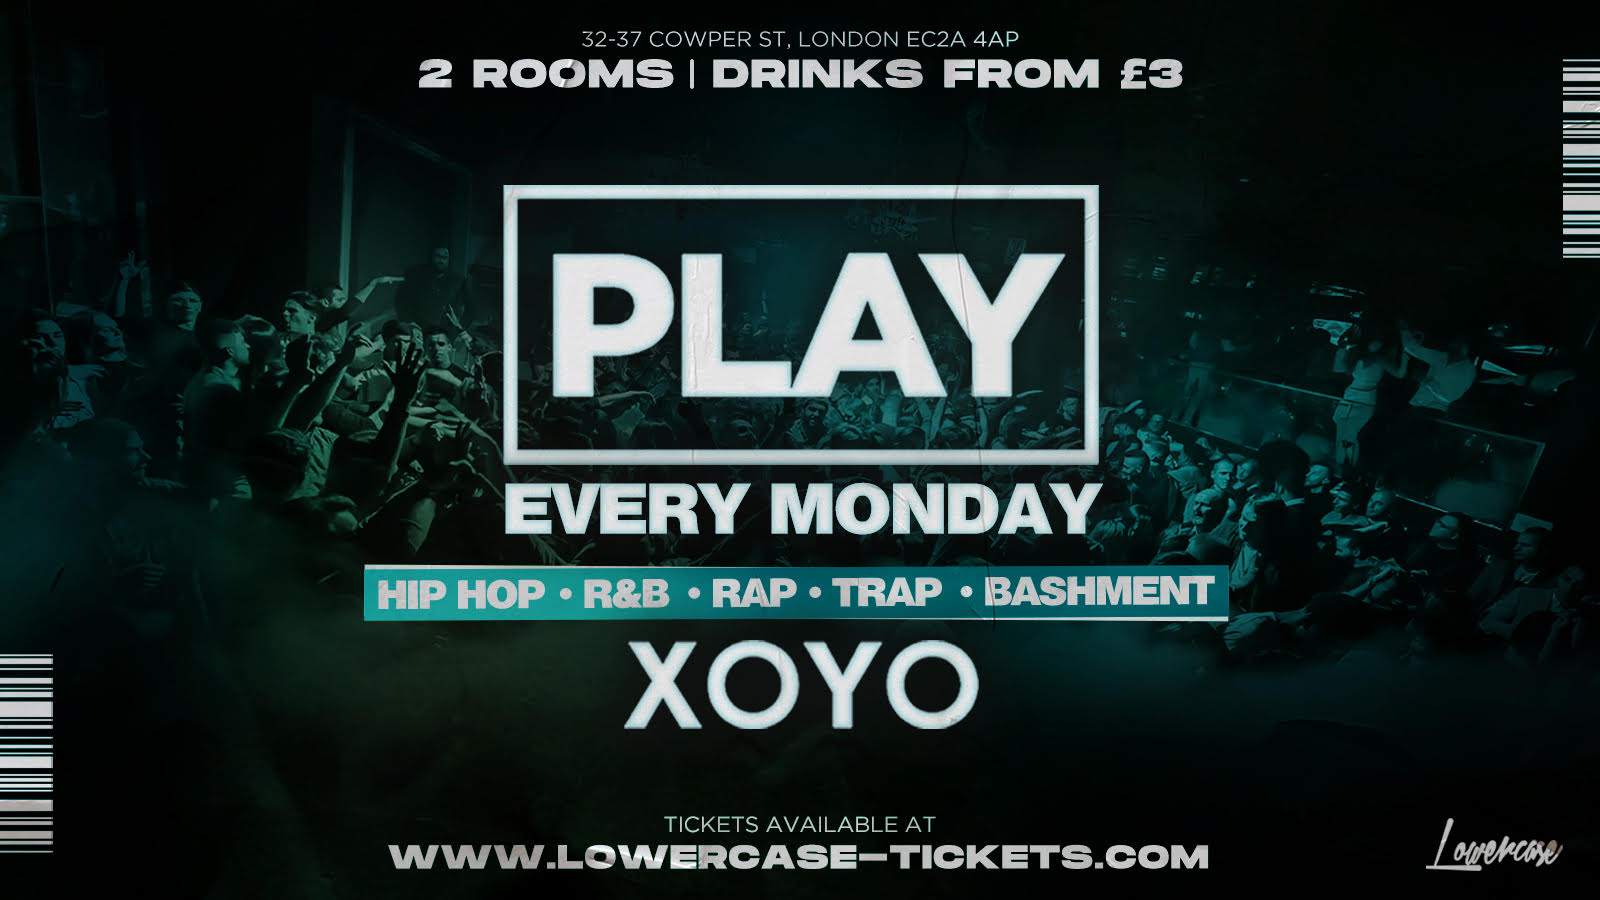 Play London - The Biggest Weekly Monday Student Night - フライヤー表